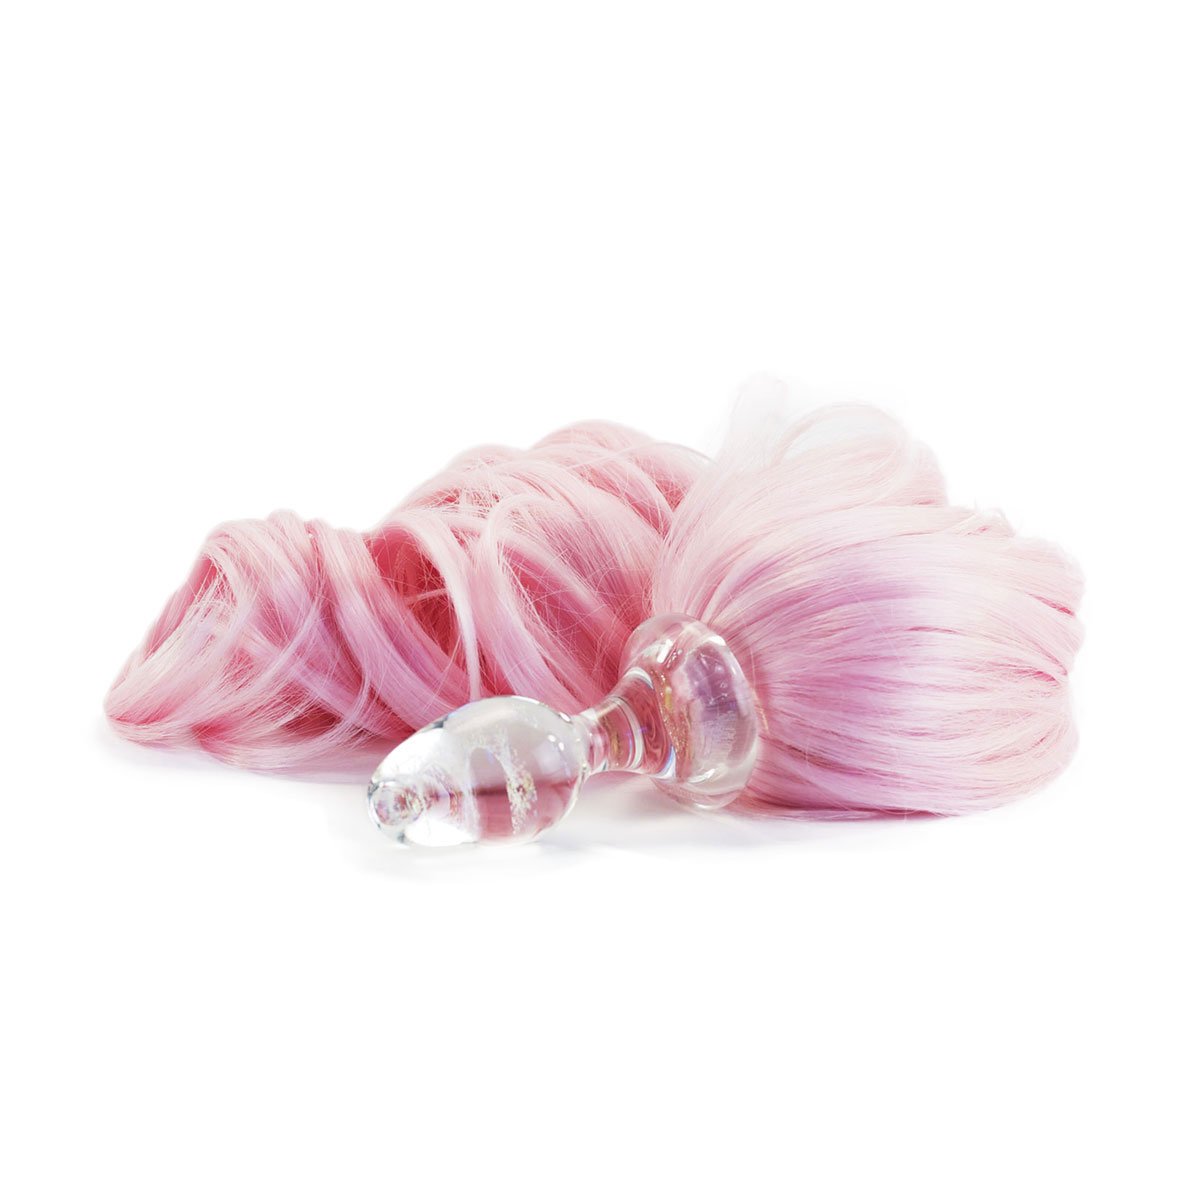 Crystal Delights My Lil Pony Tail - Buy At Luxury Toy X - Free 3-Day Shipping